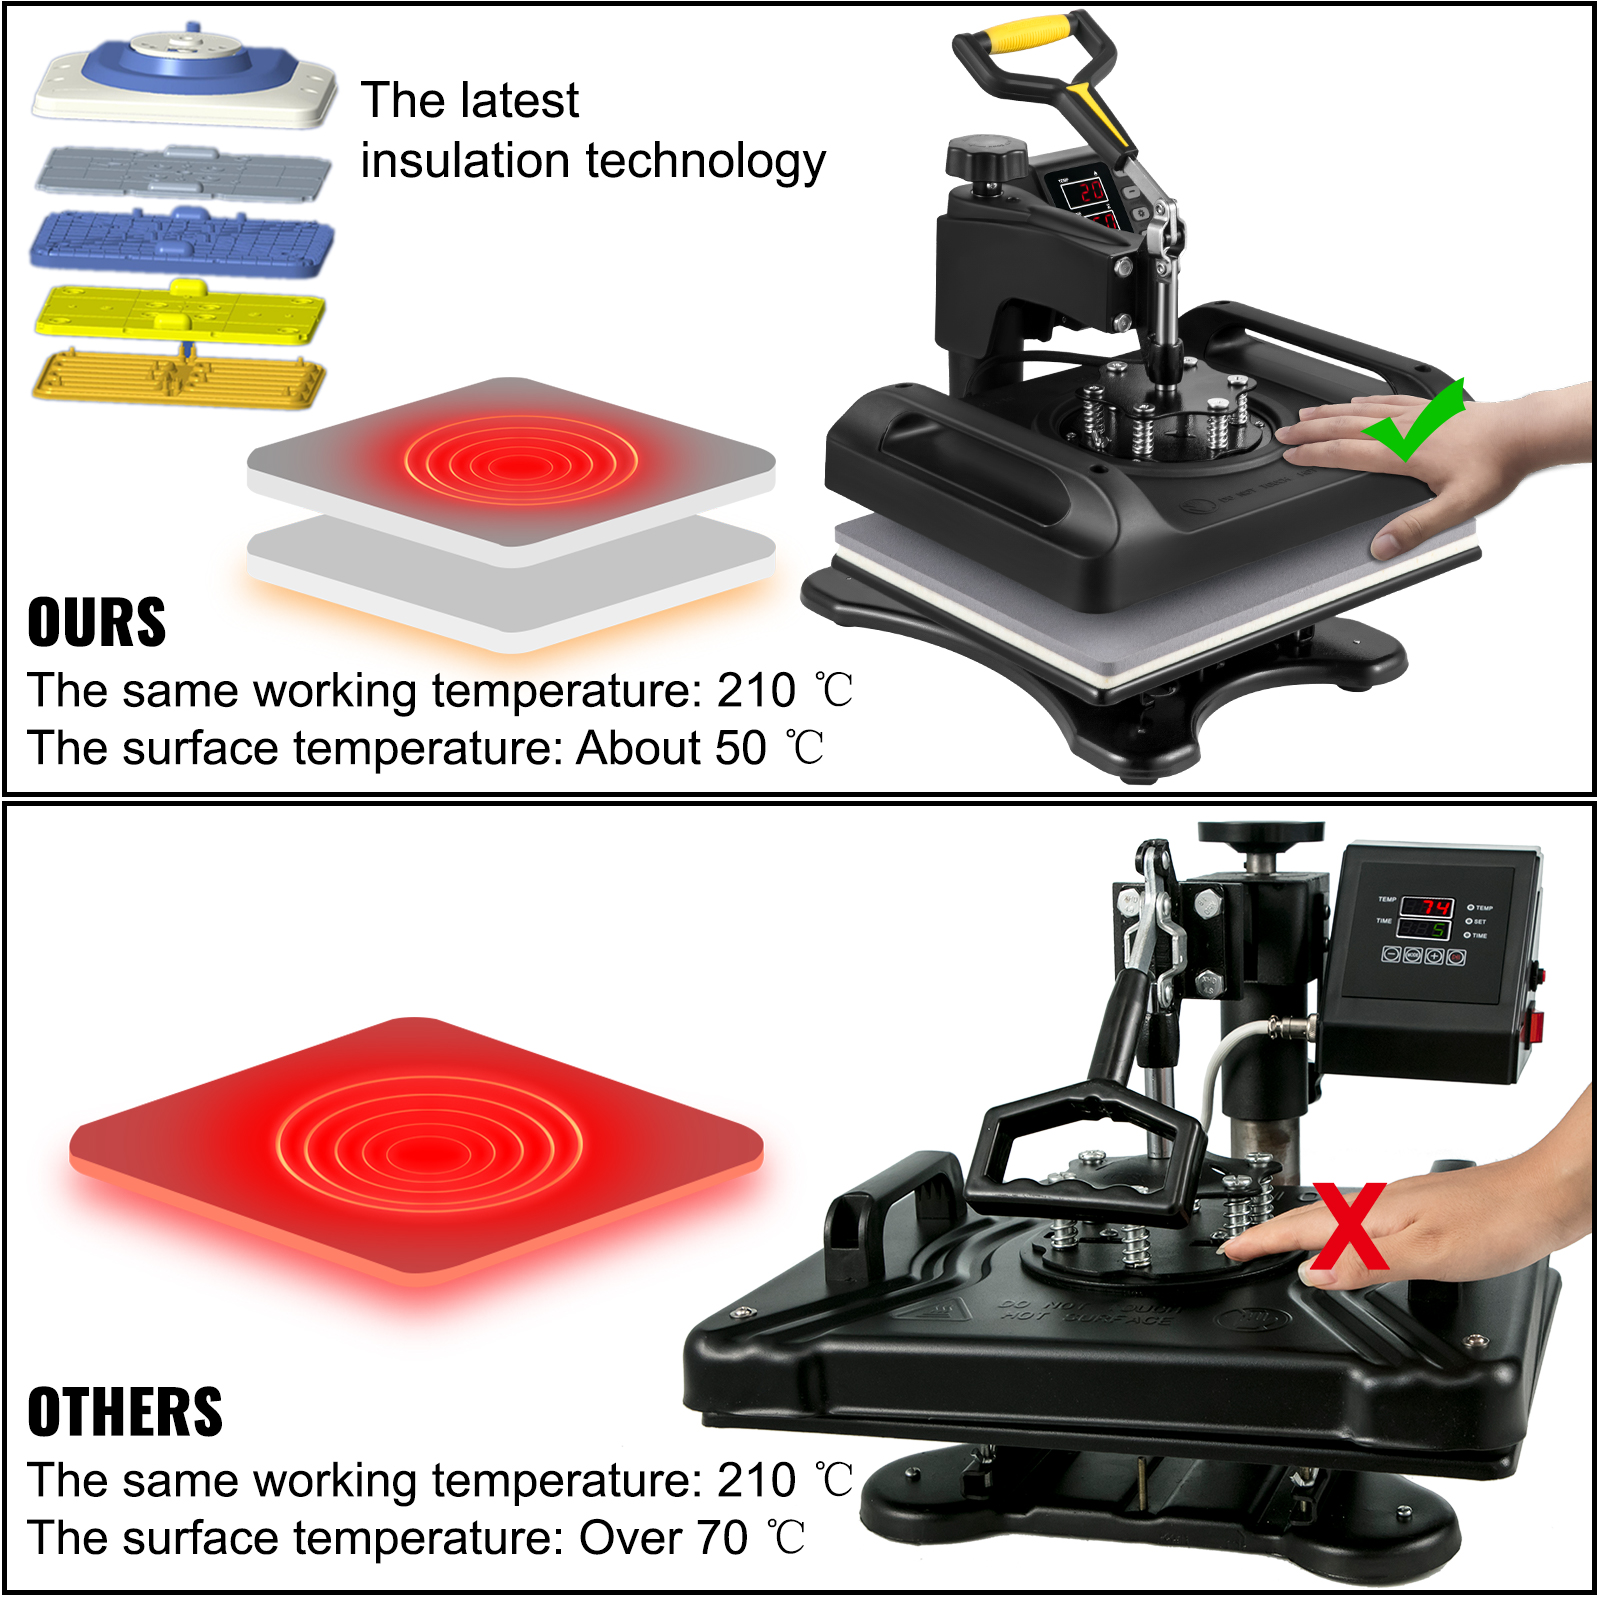 VEVOR Upgrade Heat Press Machine ETL Quality & Safety Certificated 12 x 15  in 8 in 1 Heat Press Power-Saving Combo Multifunctional Sublimation  360°Rotation Heat…